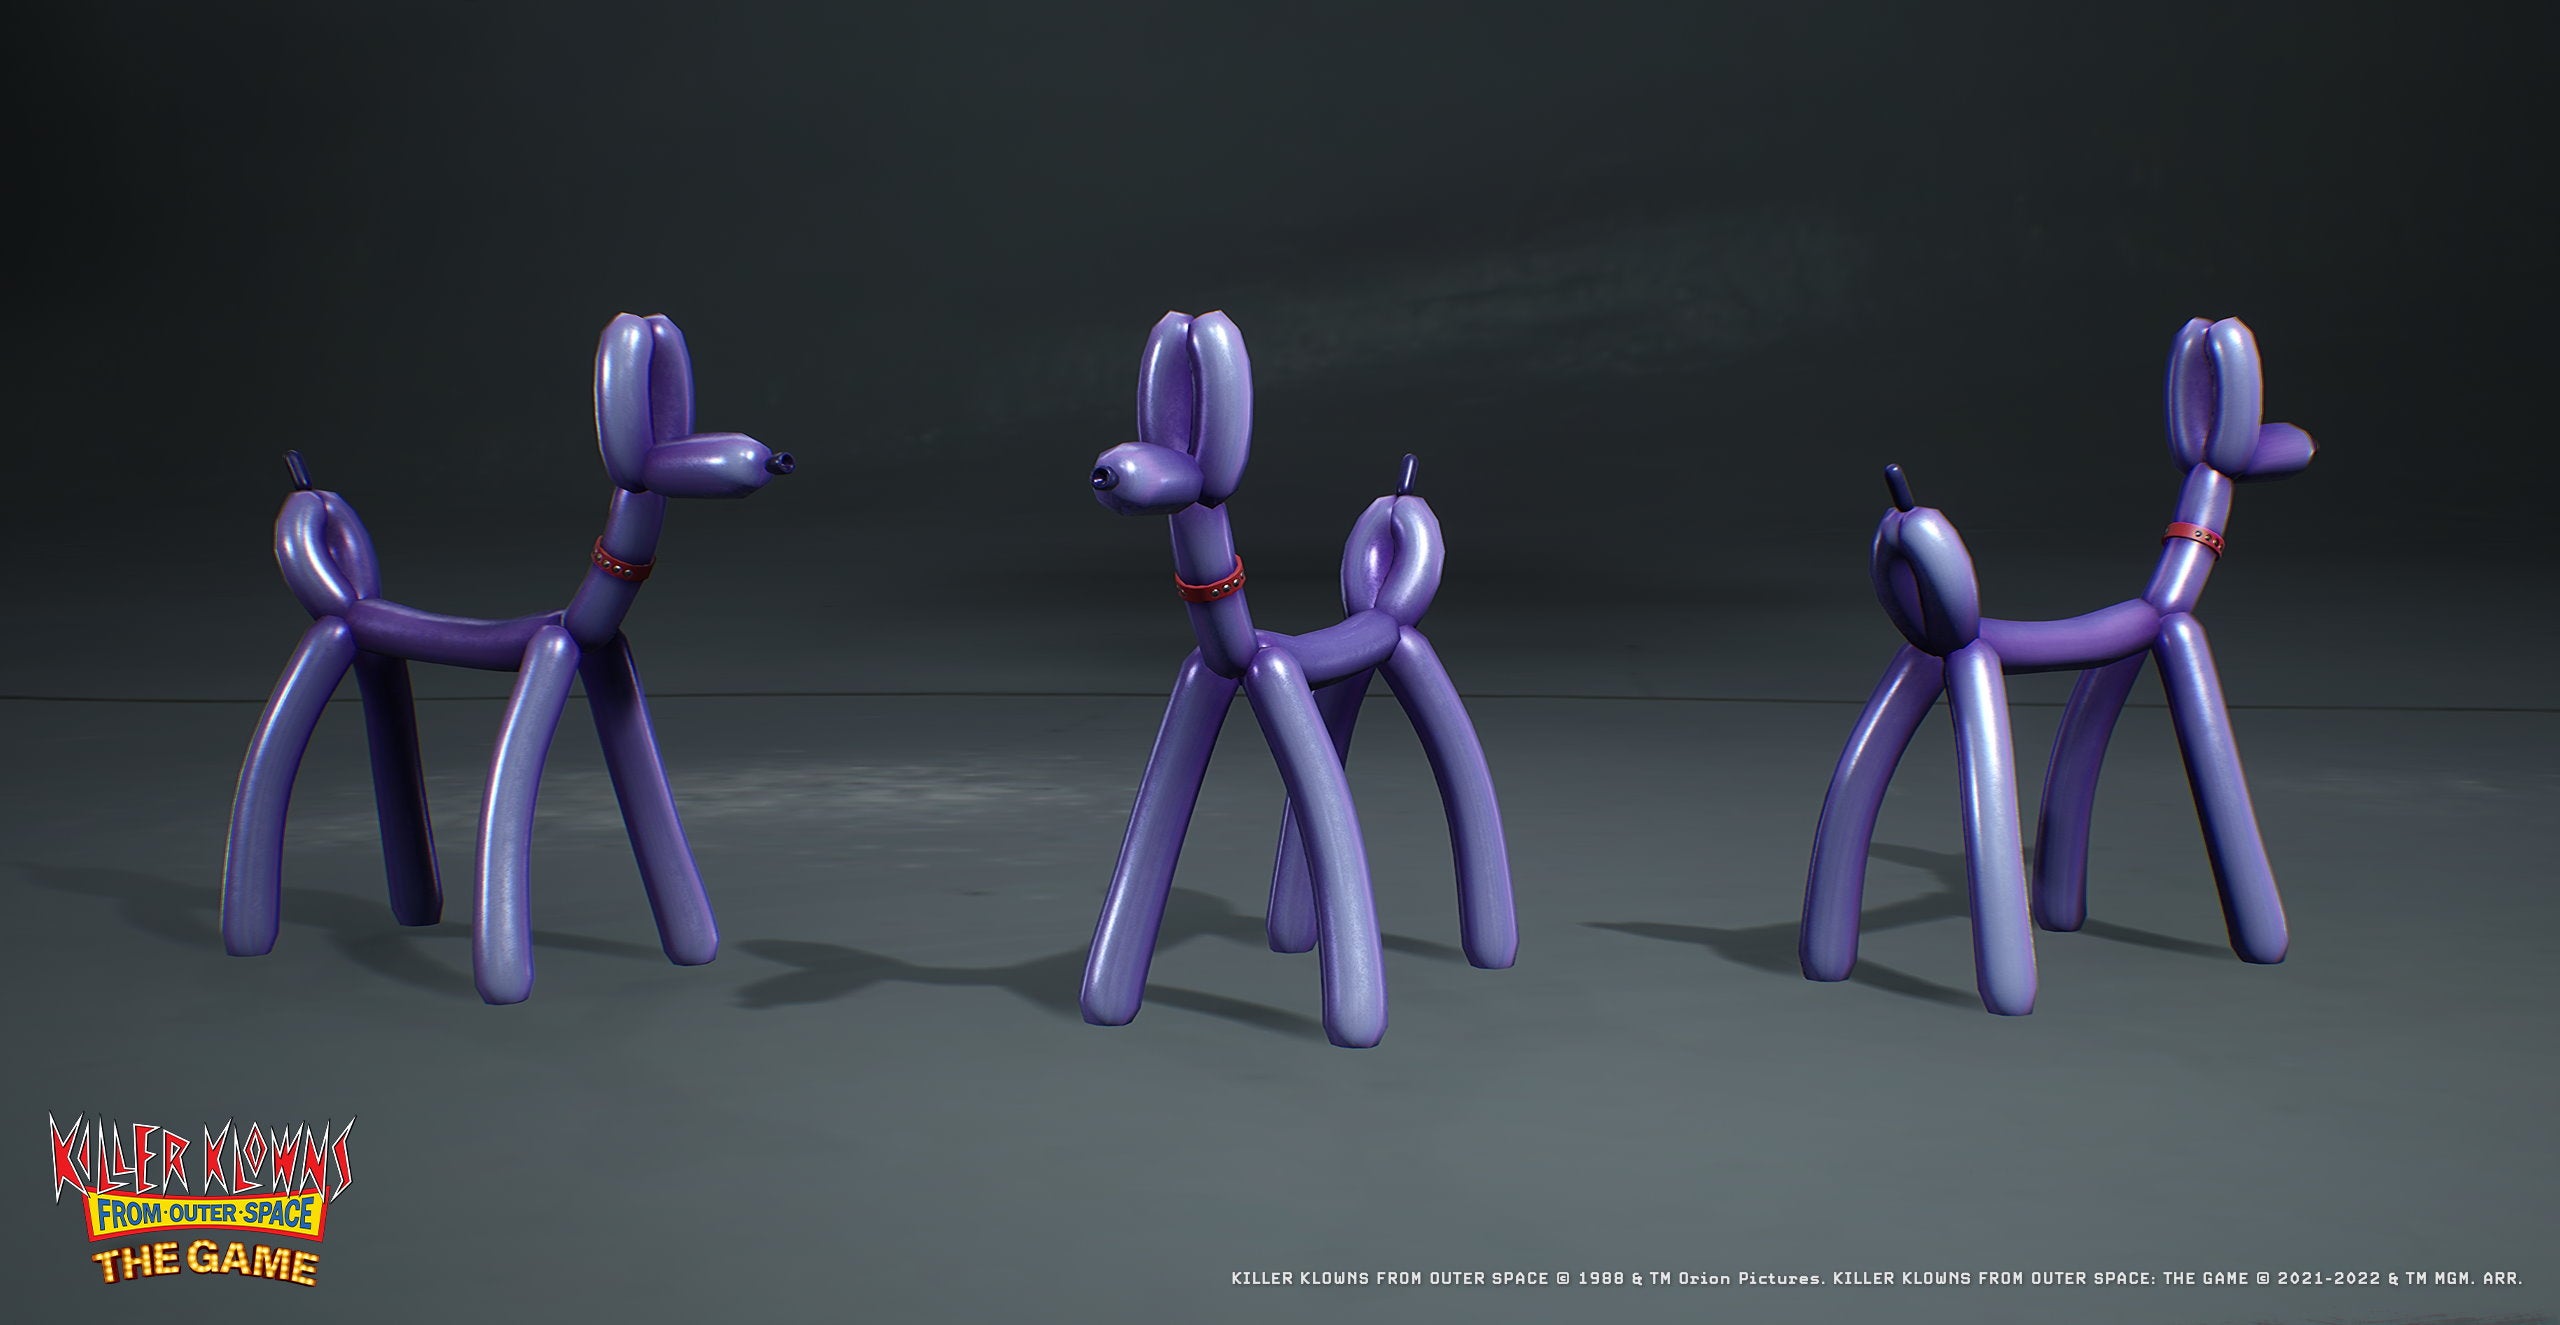 Concept art of a purple balloon dog from Killer Klowns From Outer Space: The Game